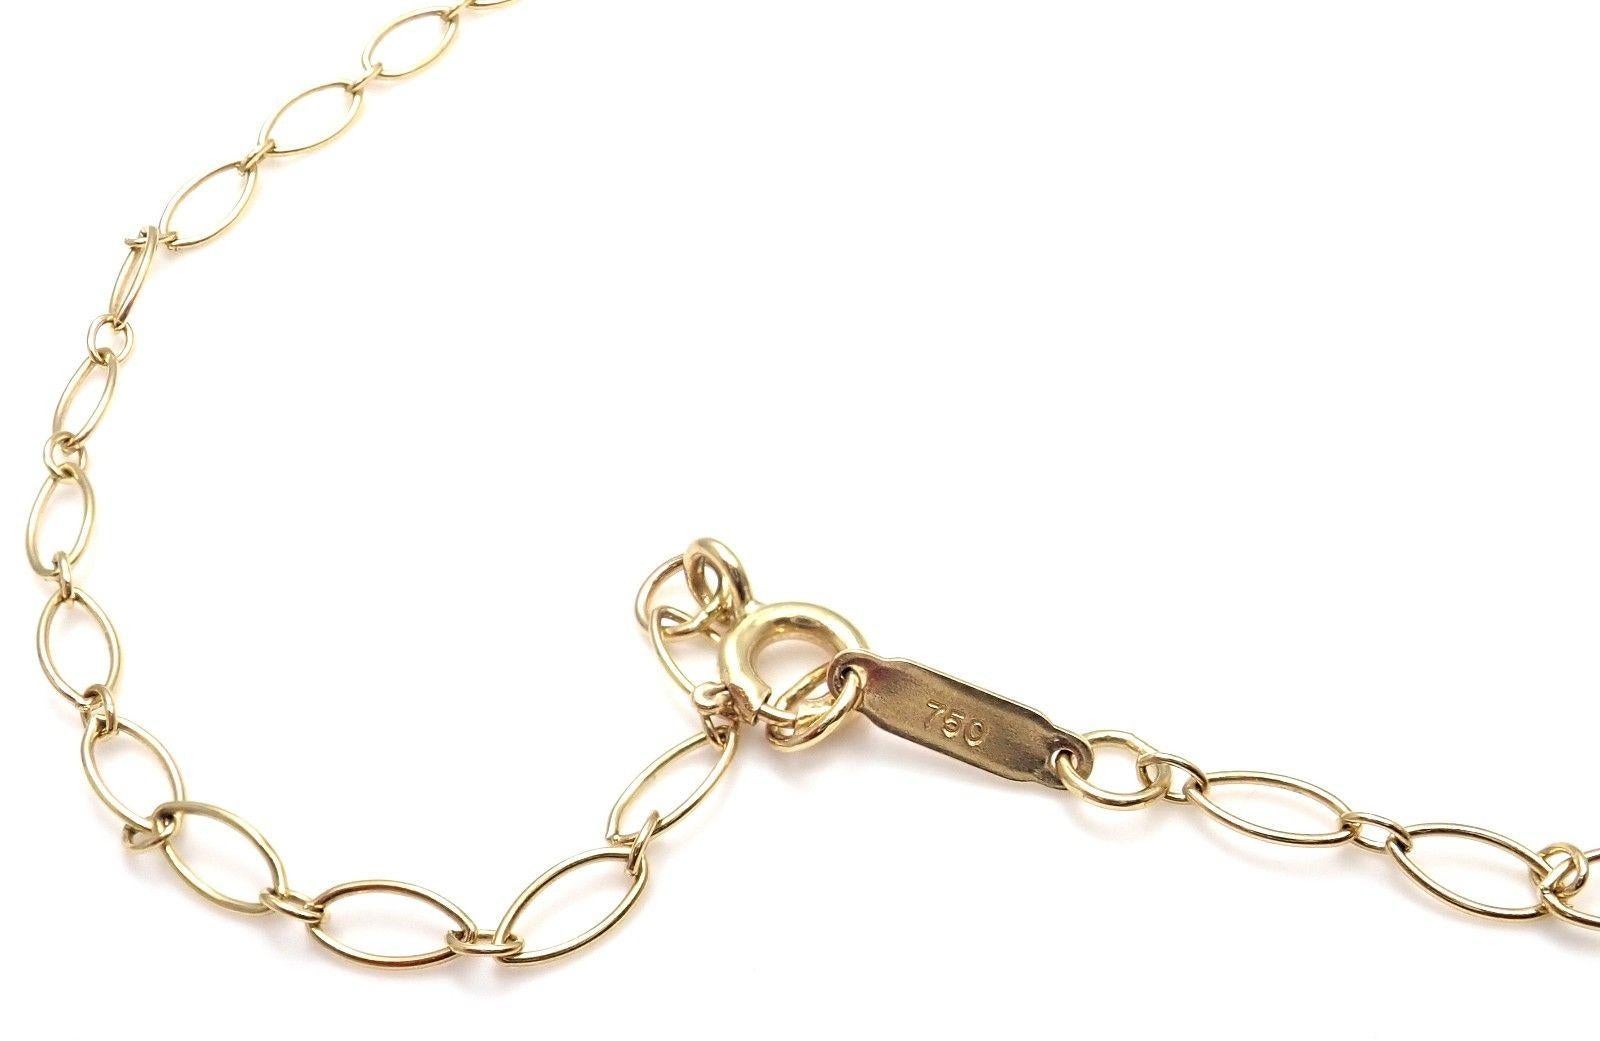 Tiffany & Co. Trefoil Key Pendant Oval Link Yellow Gold Chain Necklace 1